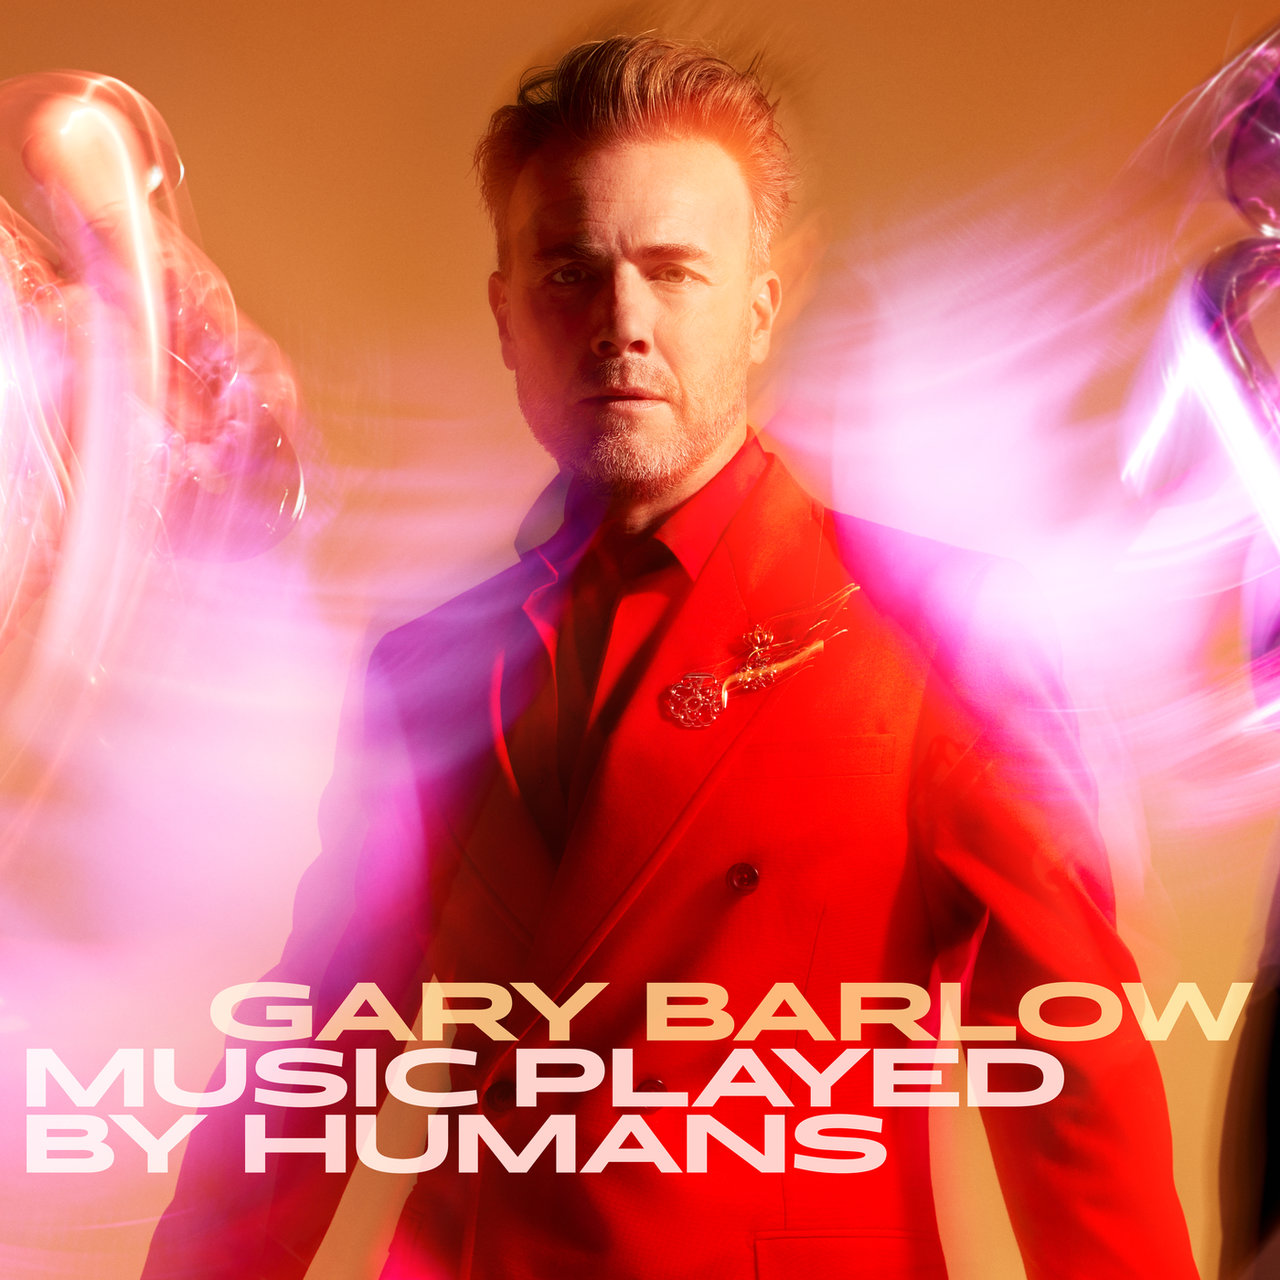 Gary Barlow – Music Played By Humans (Deluxe) (2020) [FLAC 24bit/44,1kHz]